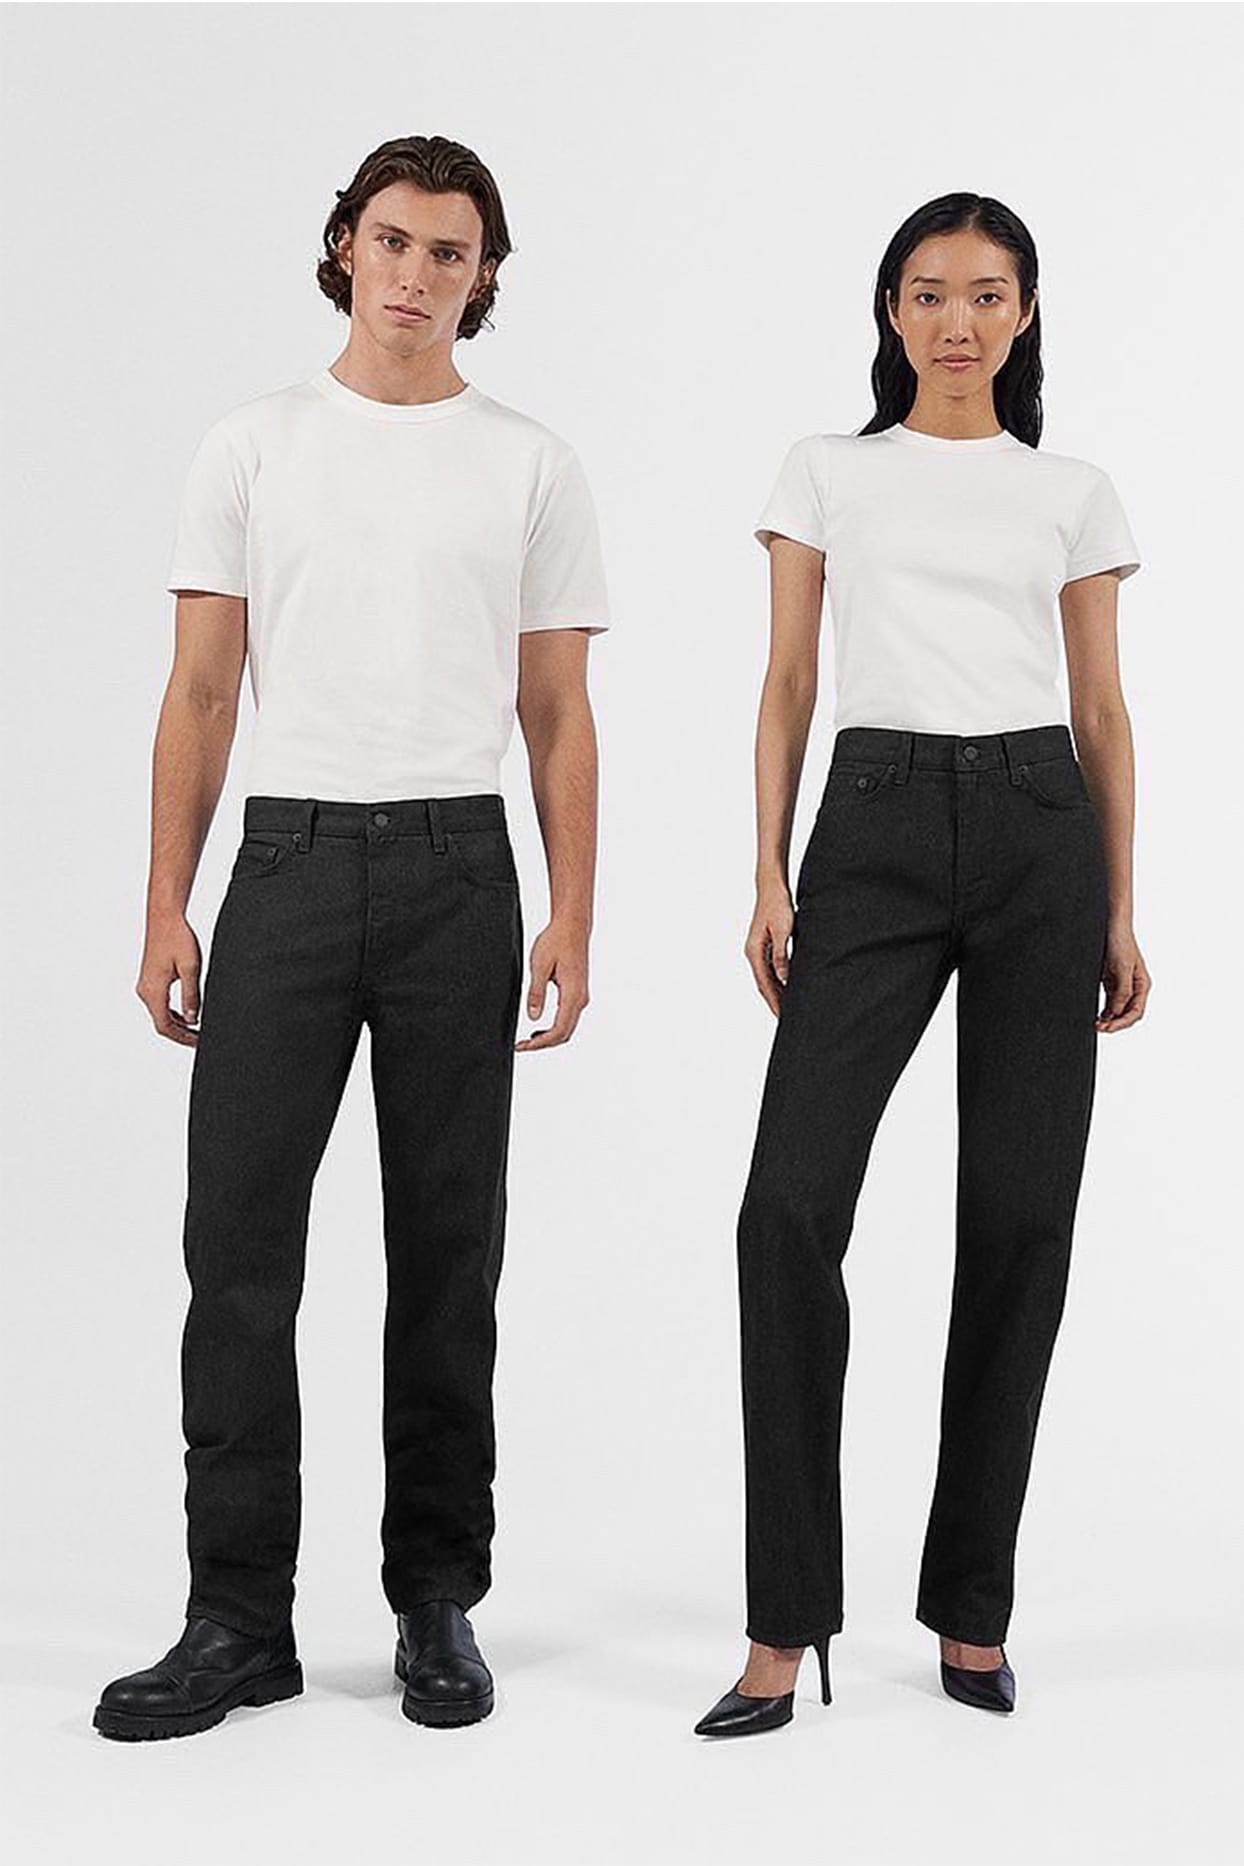 Helmut Lang and UNIQLO Reconnect for Classic Cut Jeans | Hypebeast